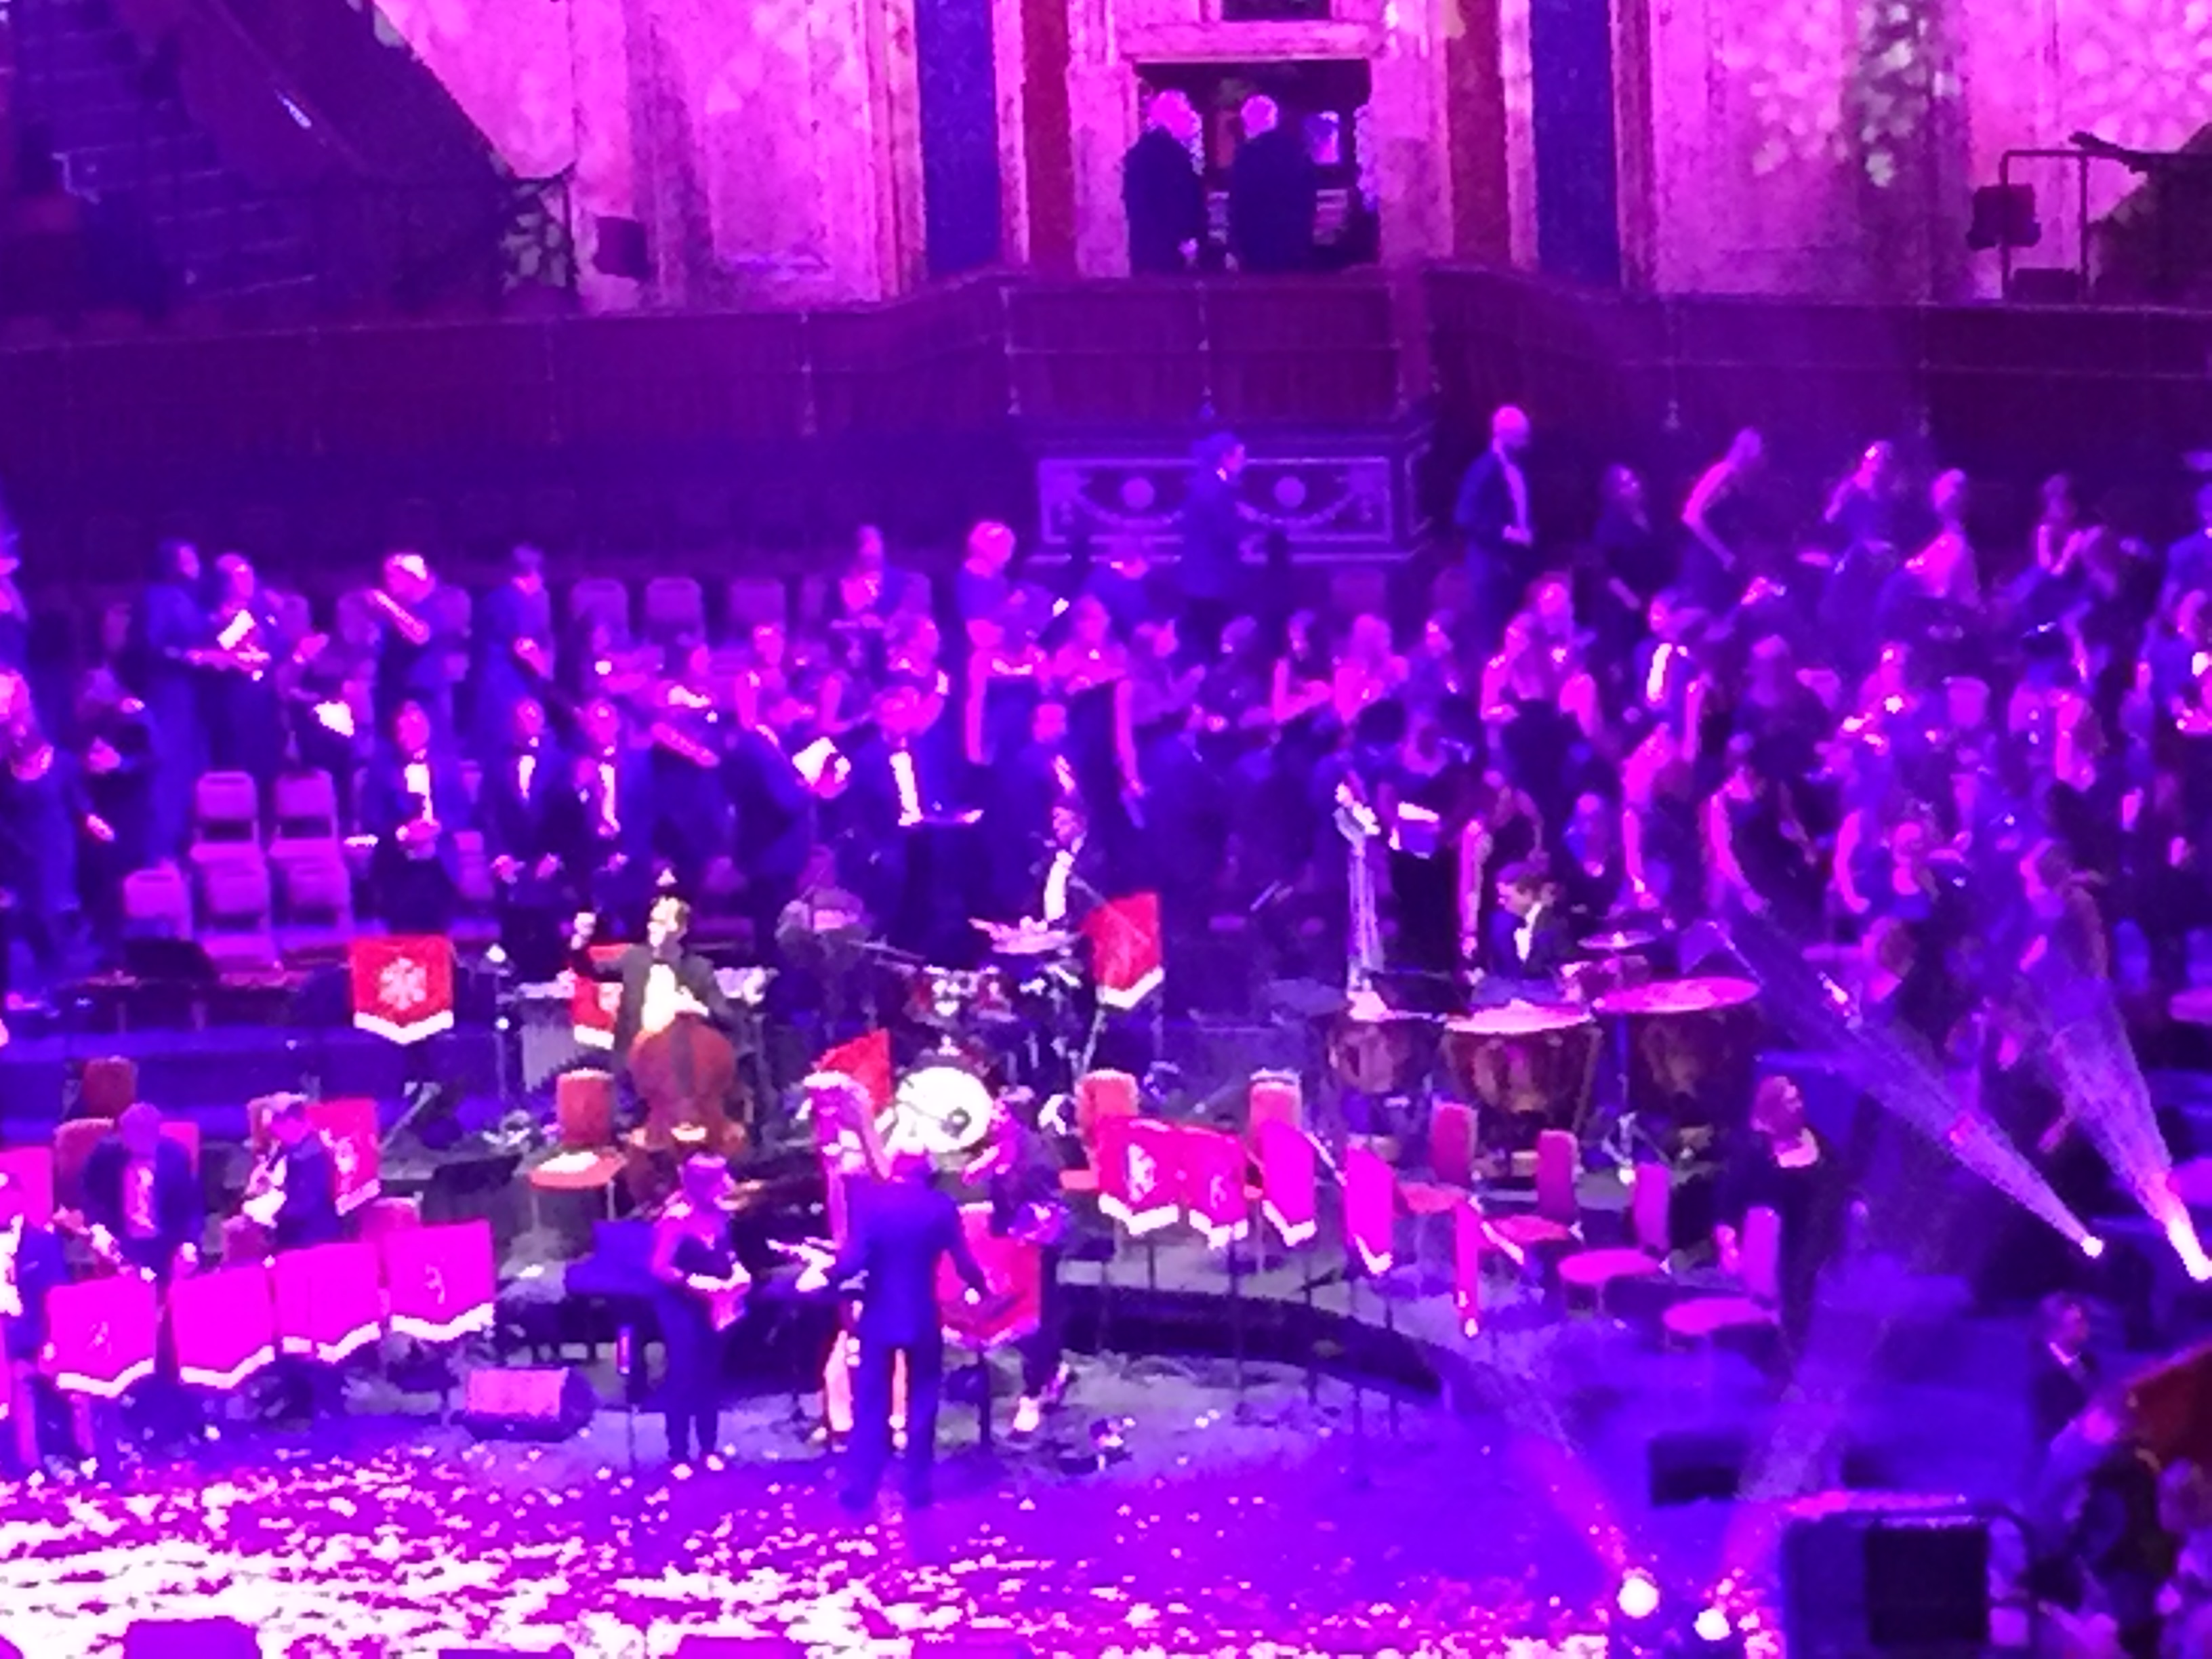 The band and choir leaving the stage, under pink and purple lighting.